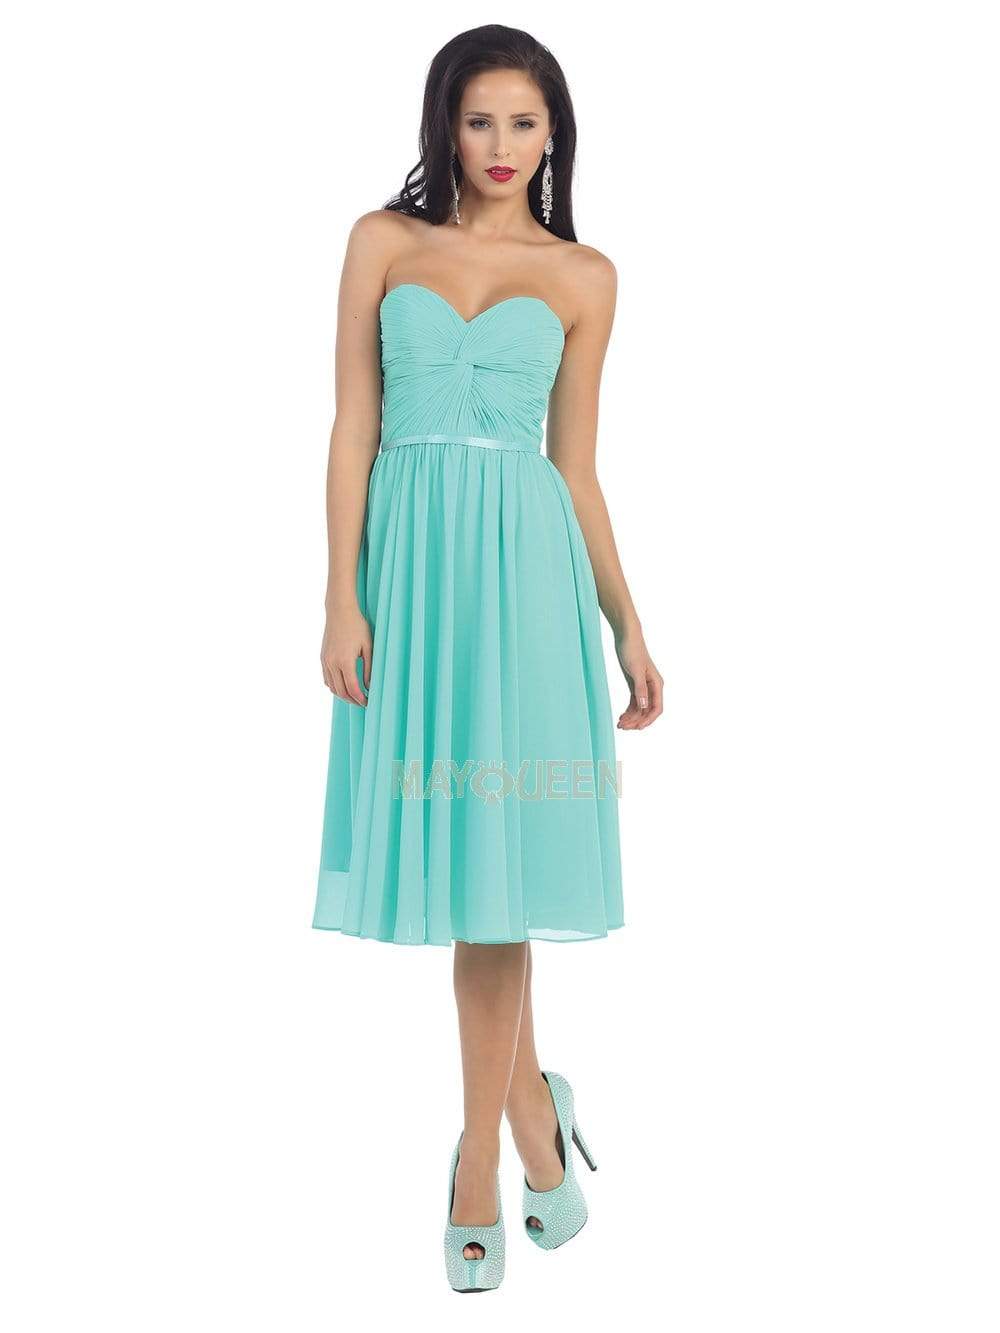 Image of May Queen - MQ1161 Strapless Sweetheart Neckline Twisted Front Dress